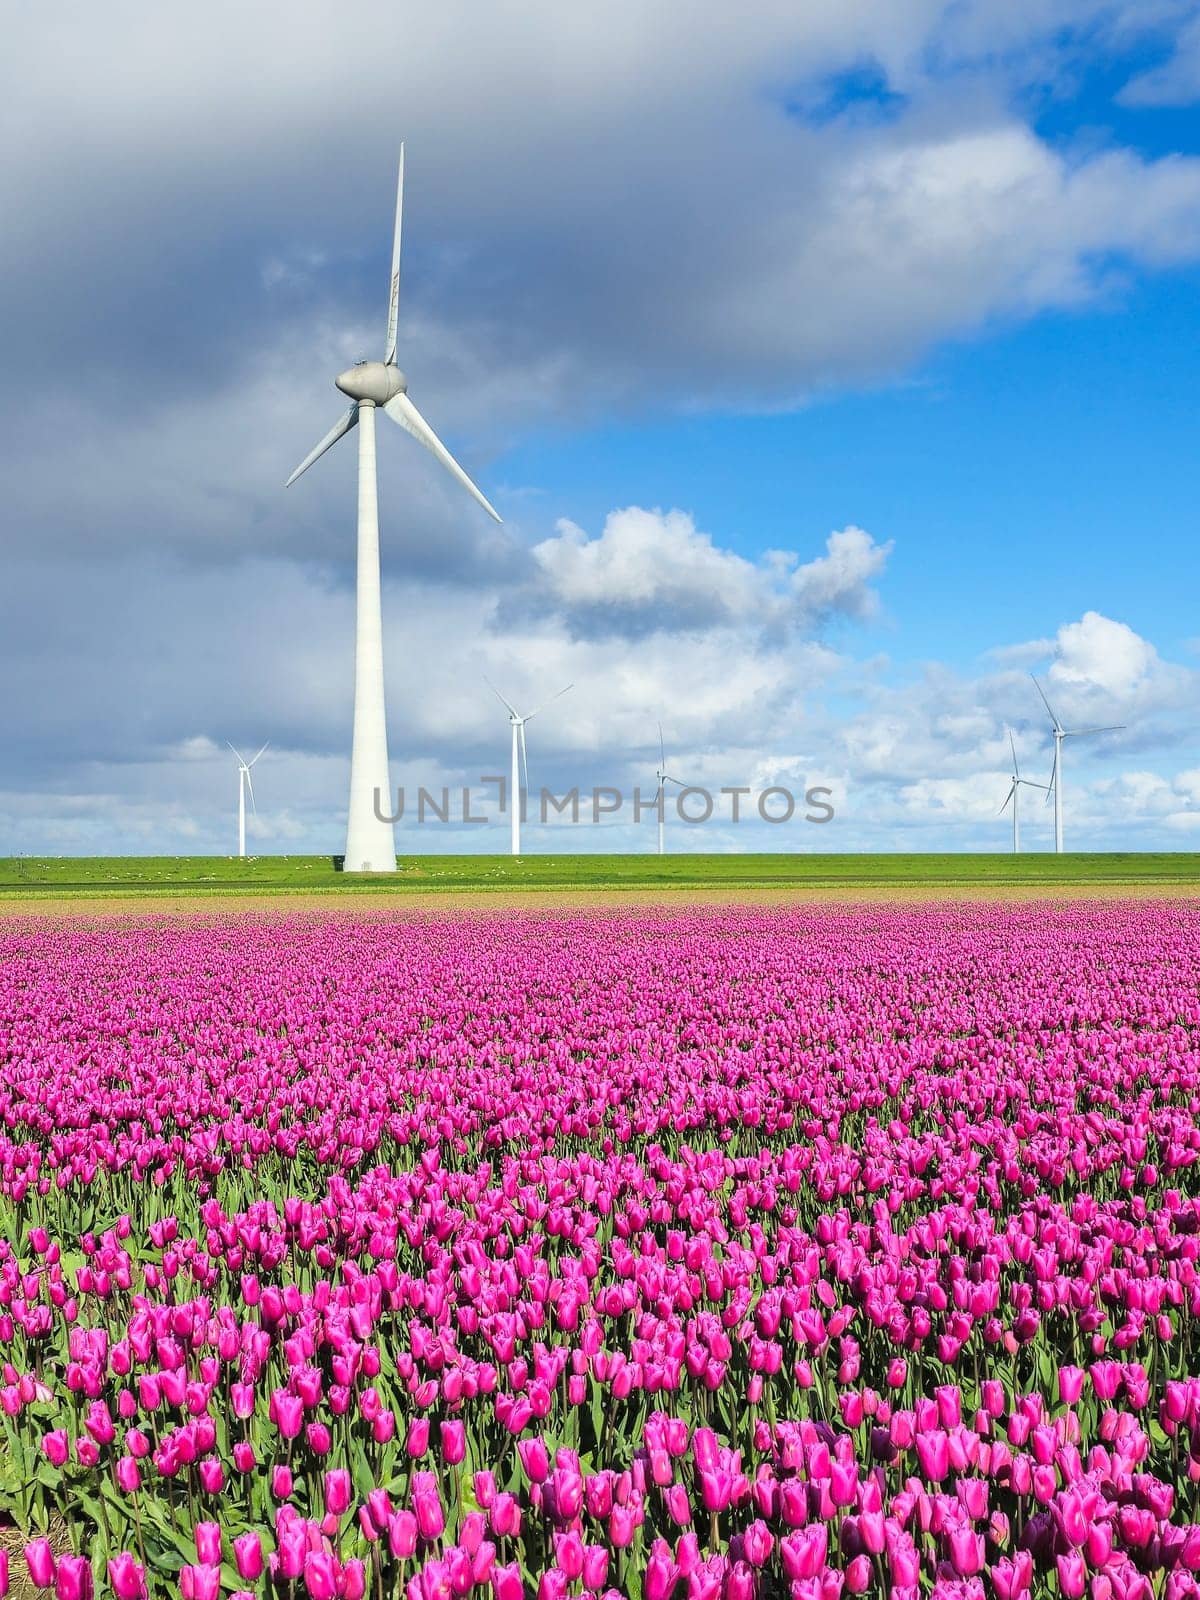 A picturesque scene of a field of colorful flowers swaying in the wind, with a traditional windmill in the background against a bright Spring sky by fokkebok